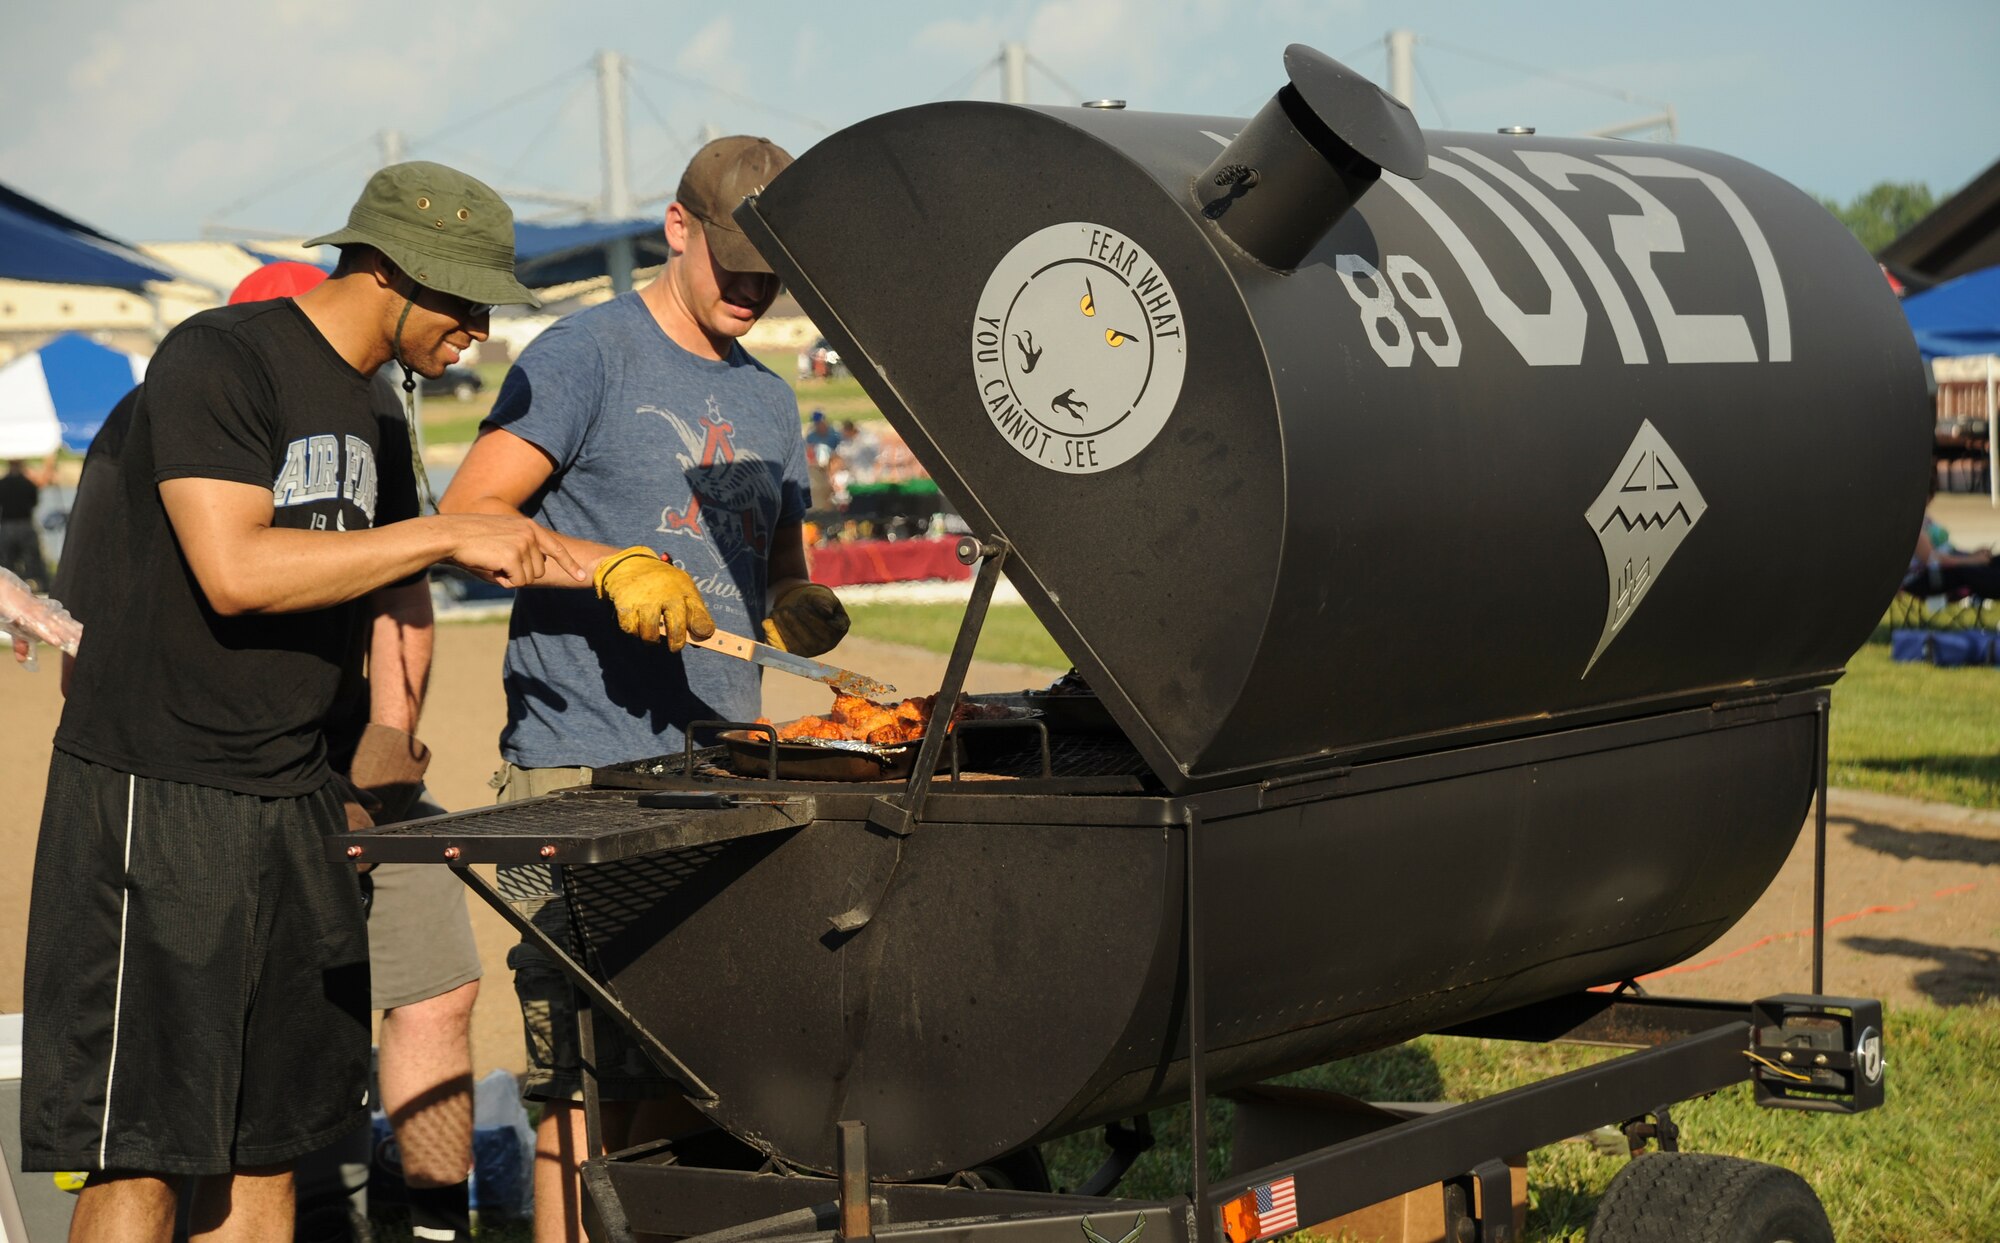 U.S. Air Force Senior Airman Christian Anthony, left, and Senior Airman Brandon Orourke, right, 509th Maintenance Squadron members, grill chicken wings during the Independence Day Celebration at Whiteman Air Force Base, Mo., June 30, 2016. Squadrons participated in the event by selling refreshments or supervising activities for Team Whiteman. (U.S. Air Force photo by Senior Airman Danielle Quilla)